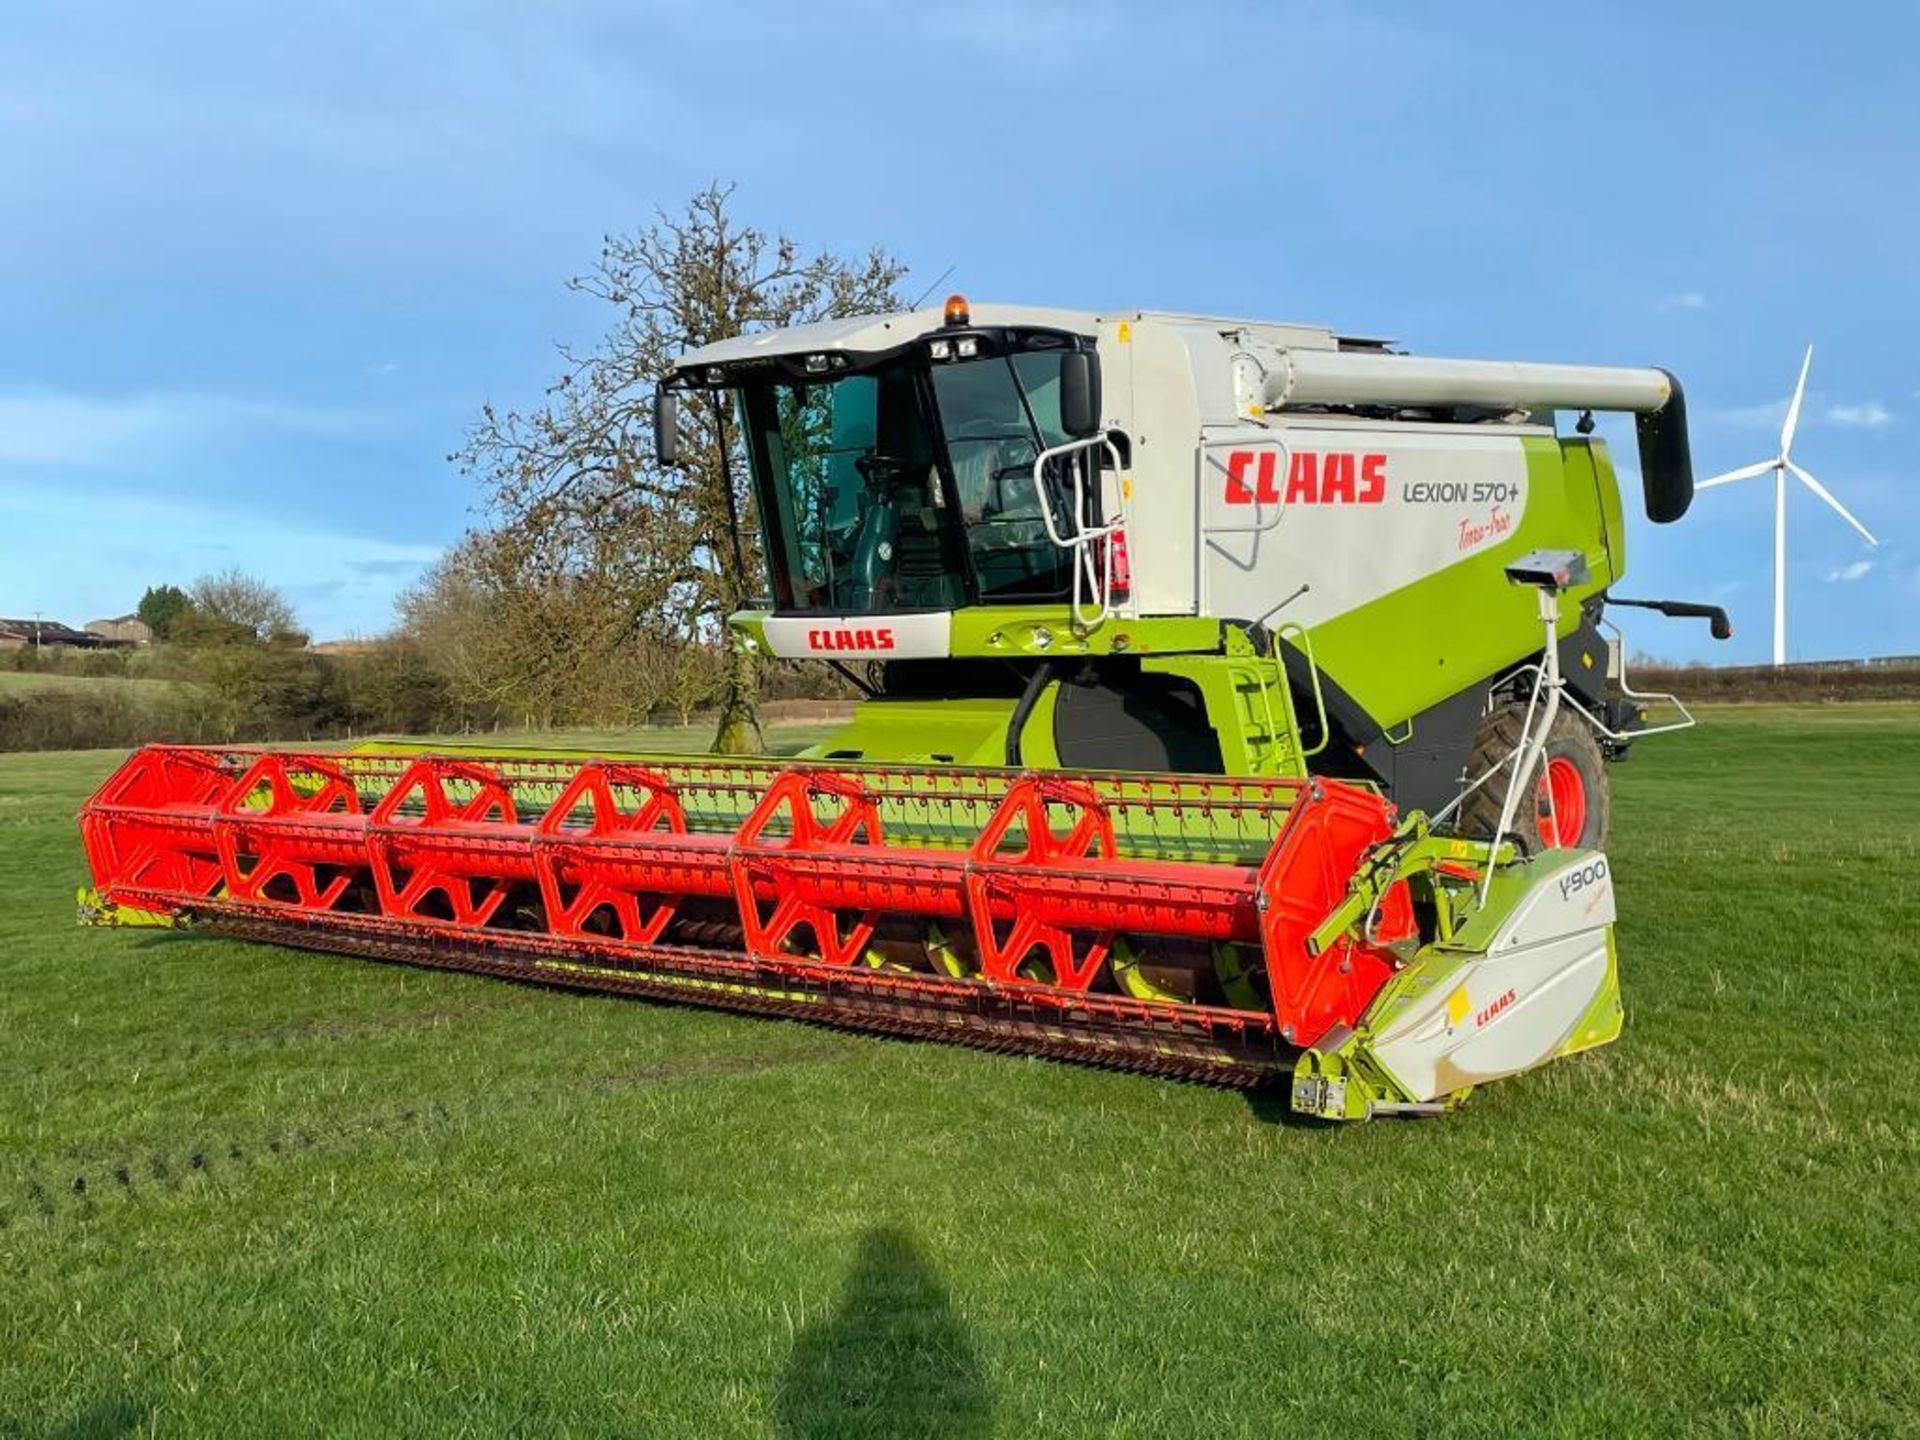 2007 Claas Lexion 570+TT Terra Trac combine harvester with straw chopper and Claas V900 header with - Image 23 of 31